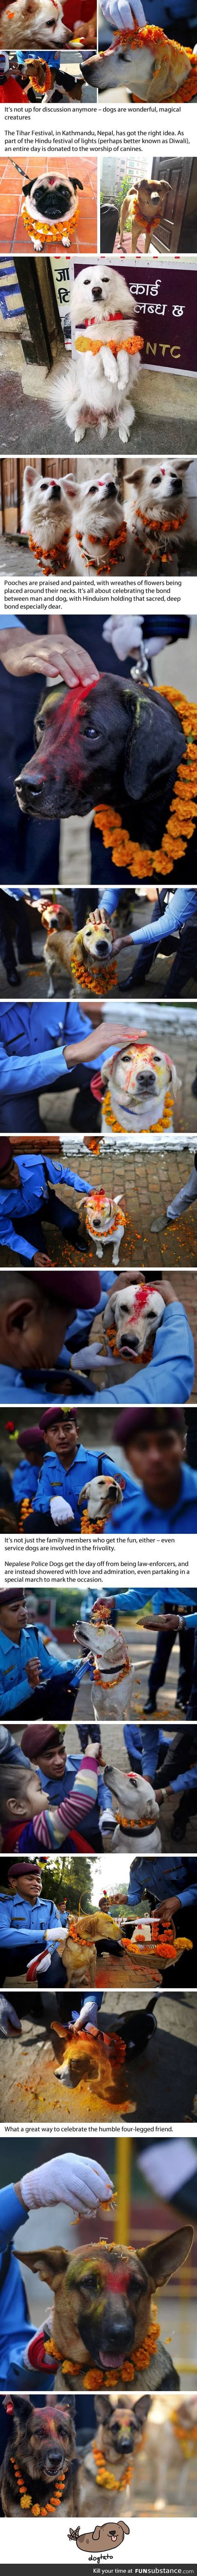 Dogs are blessed with colourful tilaka during the tihar festival in nepal